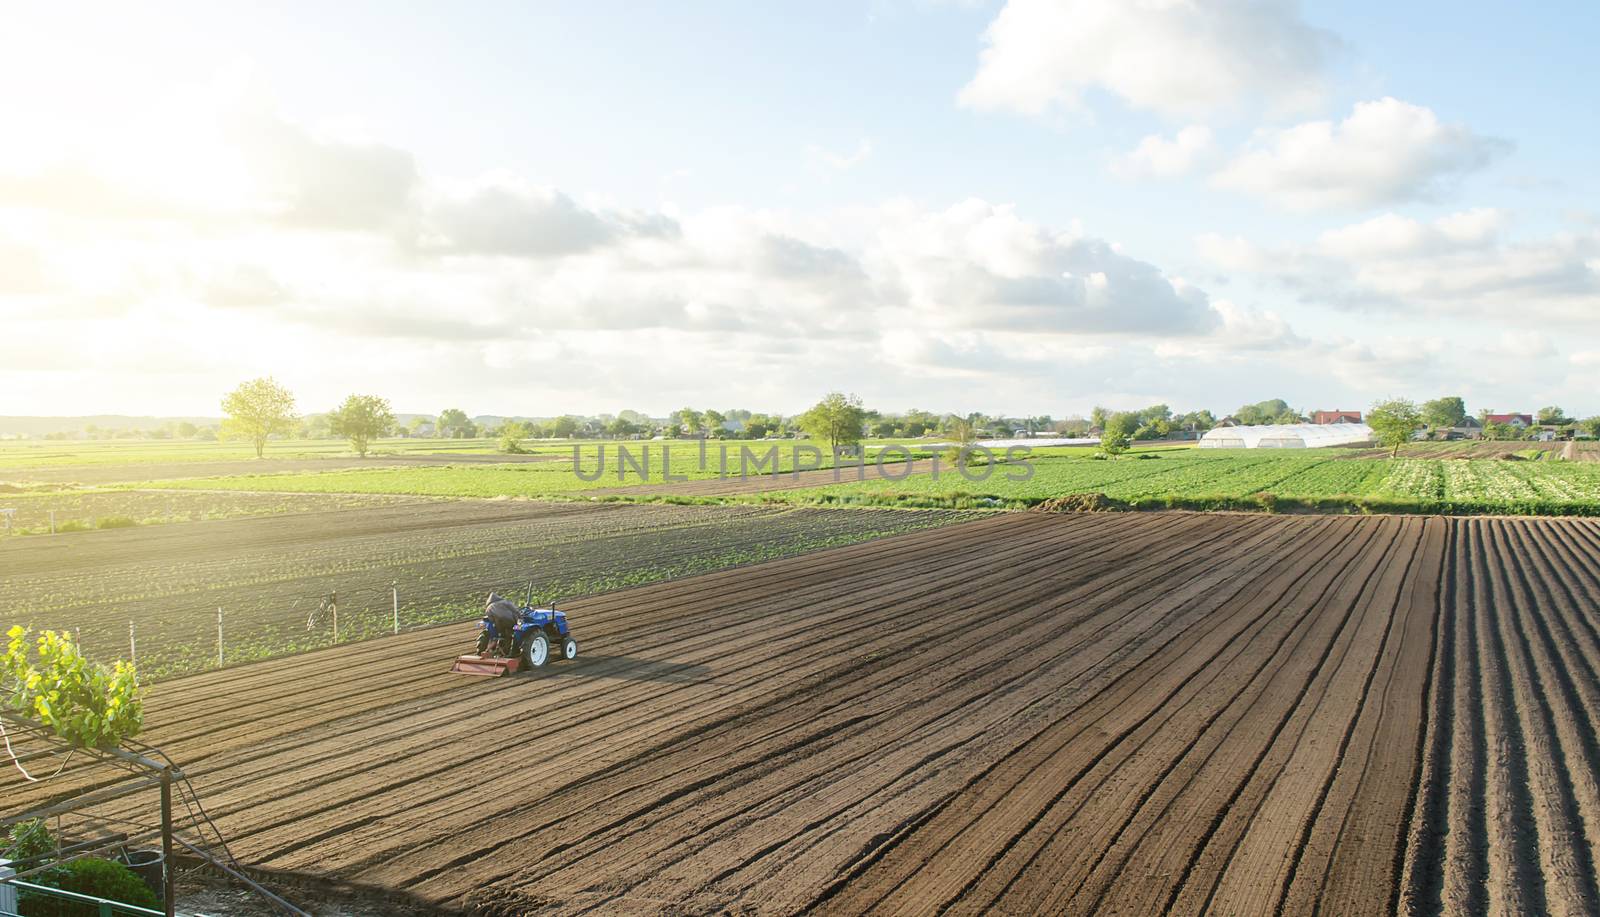 A tractor rides on a farm field. Farmer on a tractor with milling machine loosens, grinds and mixes soil. Loosening the surface, cultivating the land for further planting. Farming and agriculture. by iLixe48